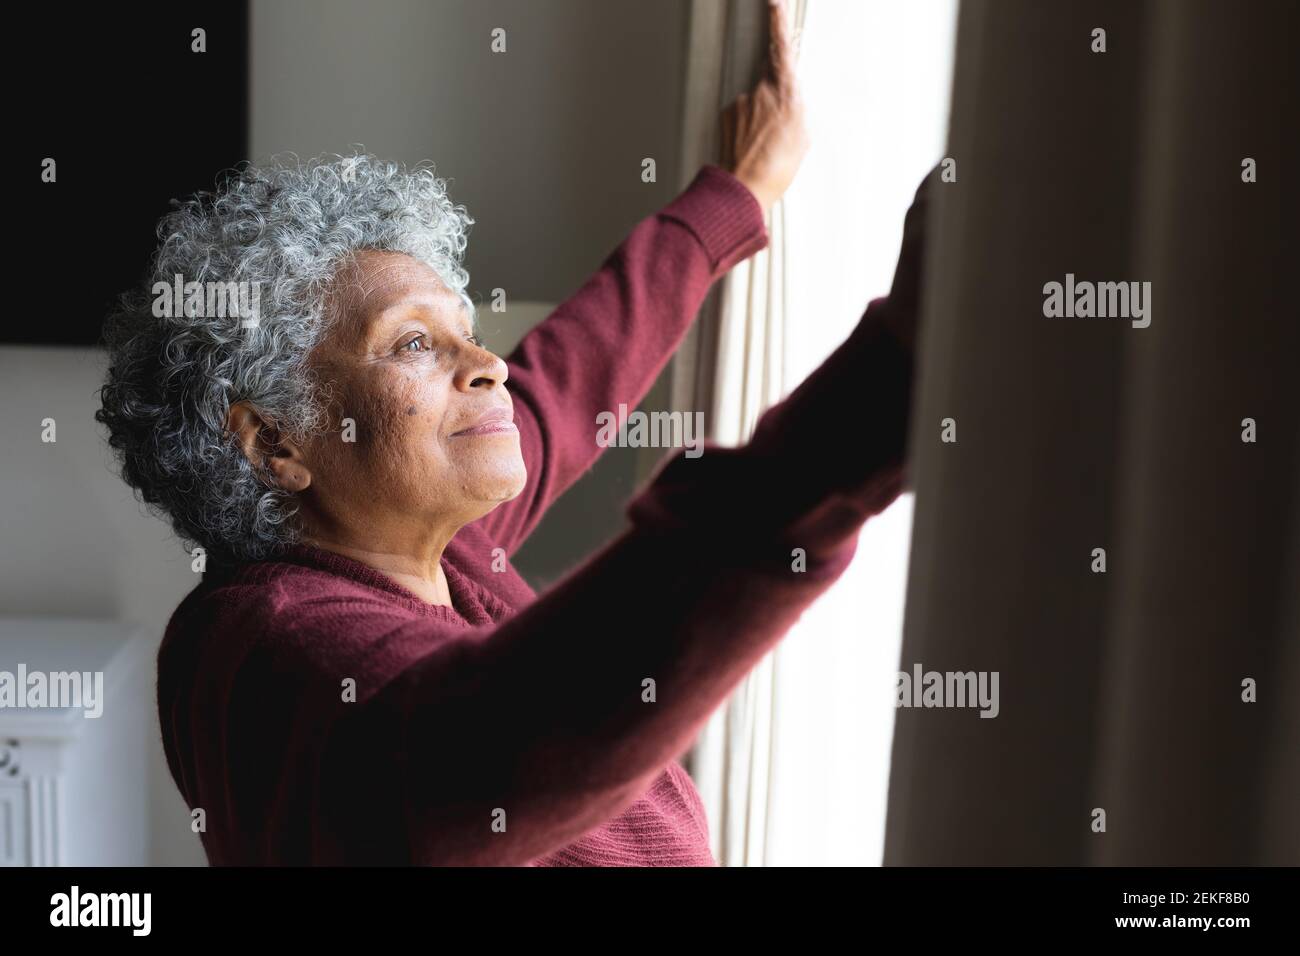 Thoughtful african american senior woman opening window curtains at home Stock Photo